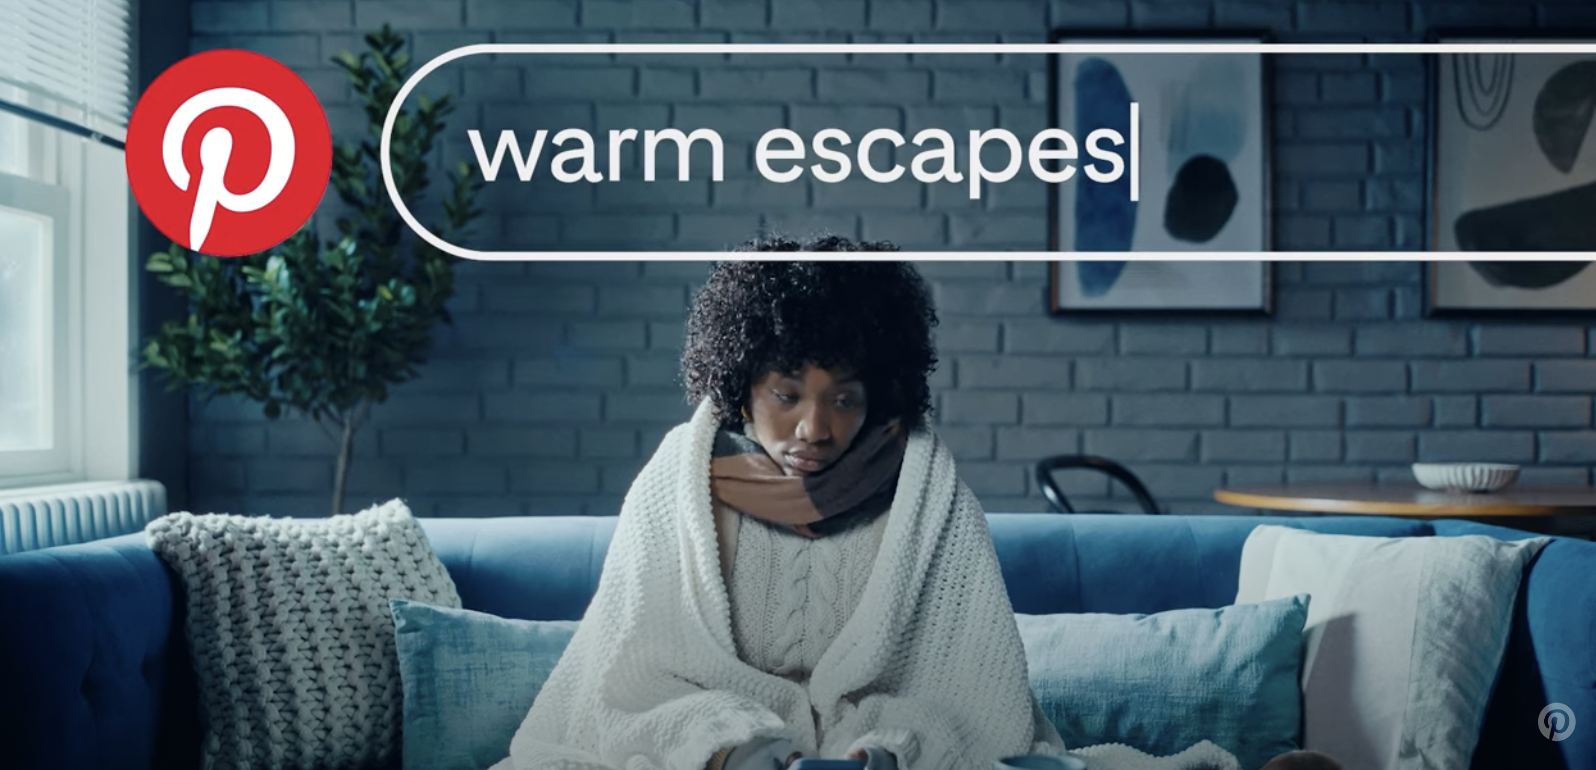 A woman is wrapped in a blanket on a couch searching "warm escapes"